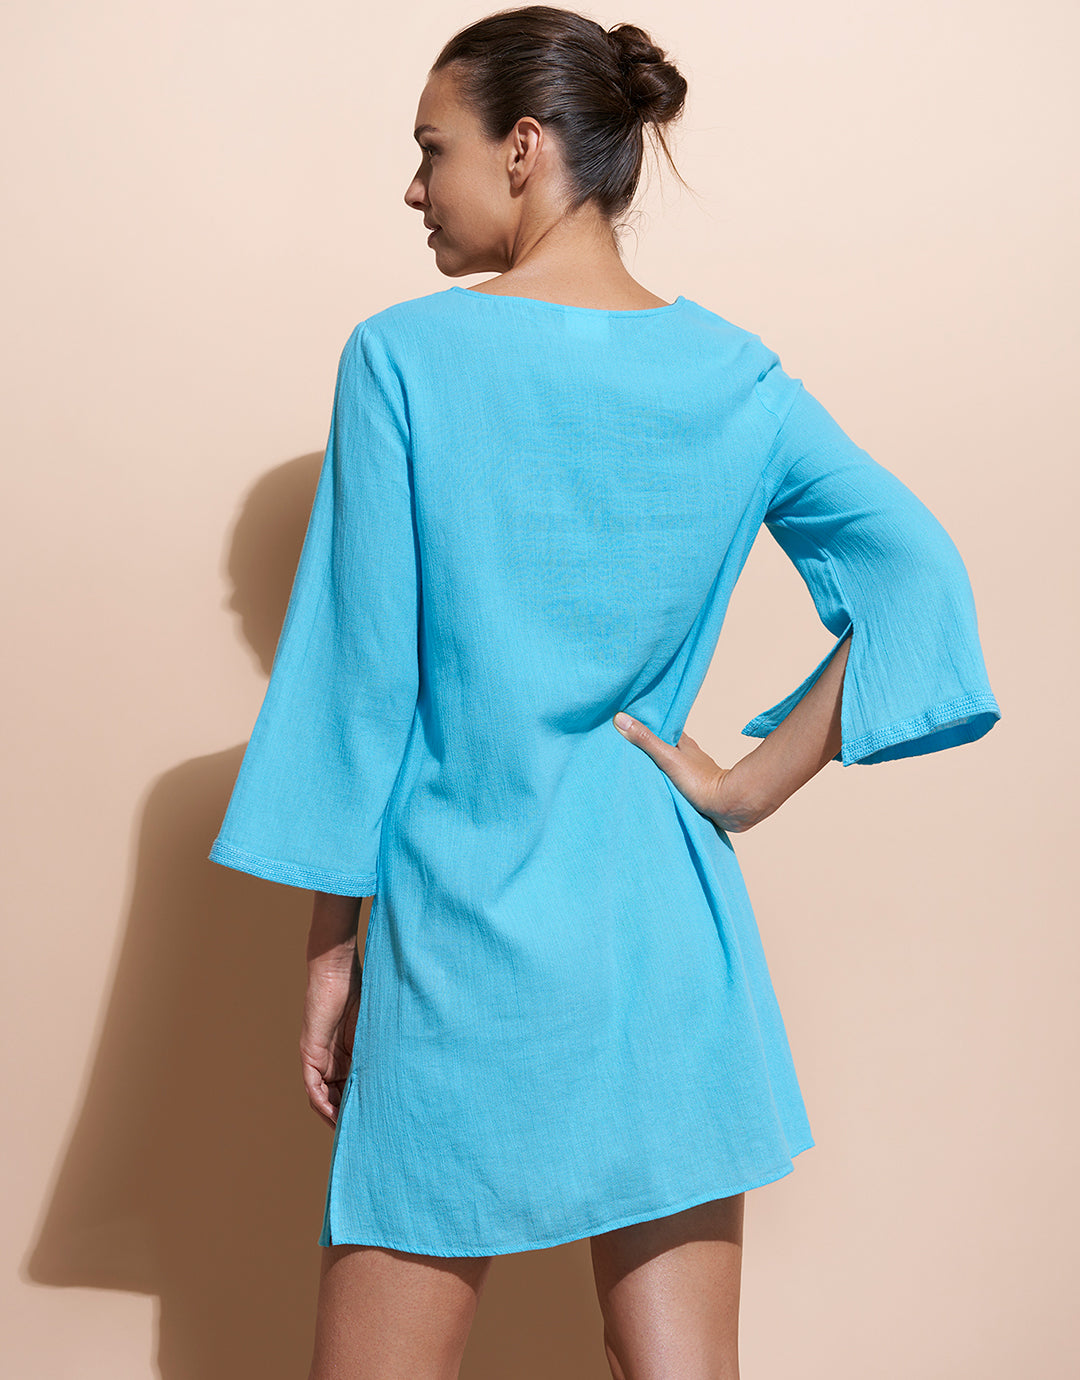 Embroidered Tunic - Turquoise - Simply Beach UK